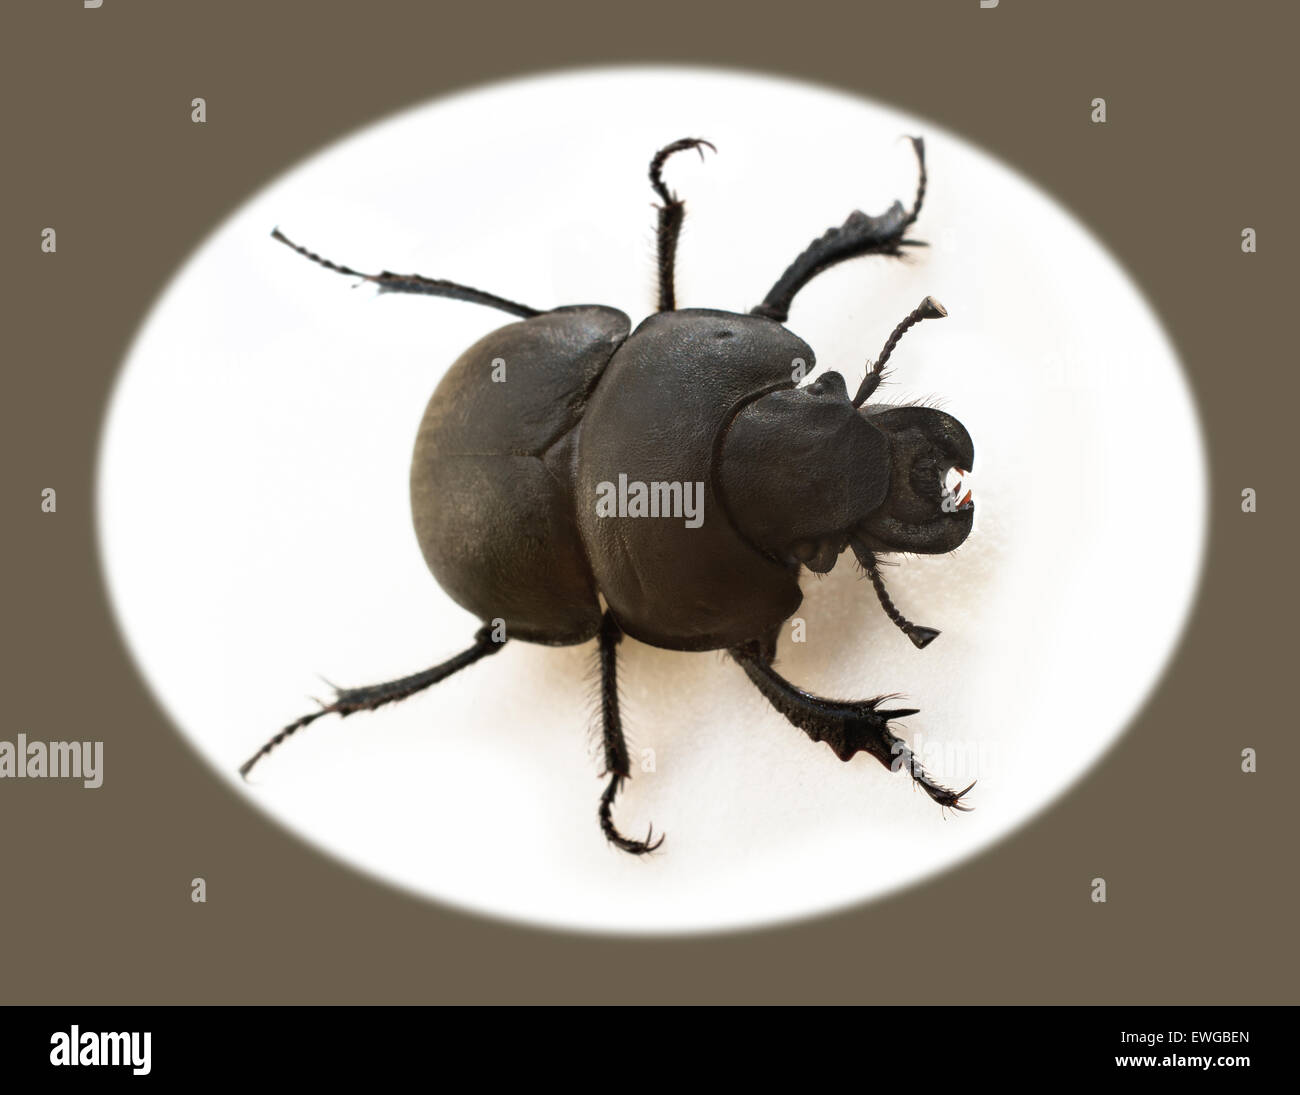 Beetle Krawczyk-holovatch (lat. Lethrus apterus) is a beetle of the family of the dung beetles burrowing animals (Geotrupidae). Stock Photo